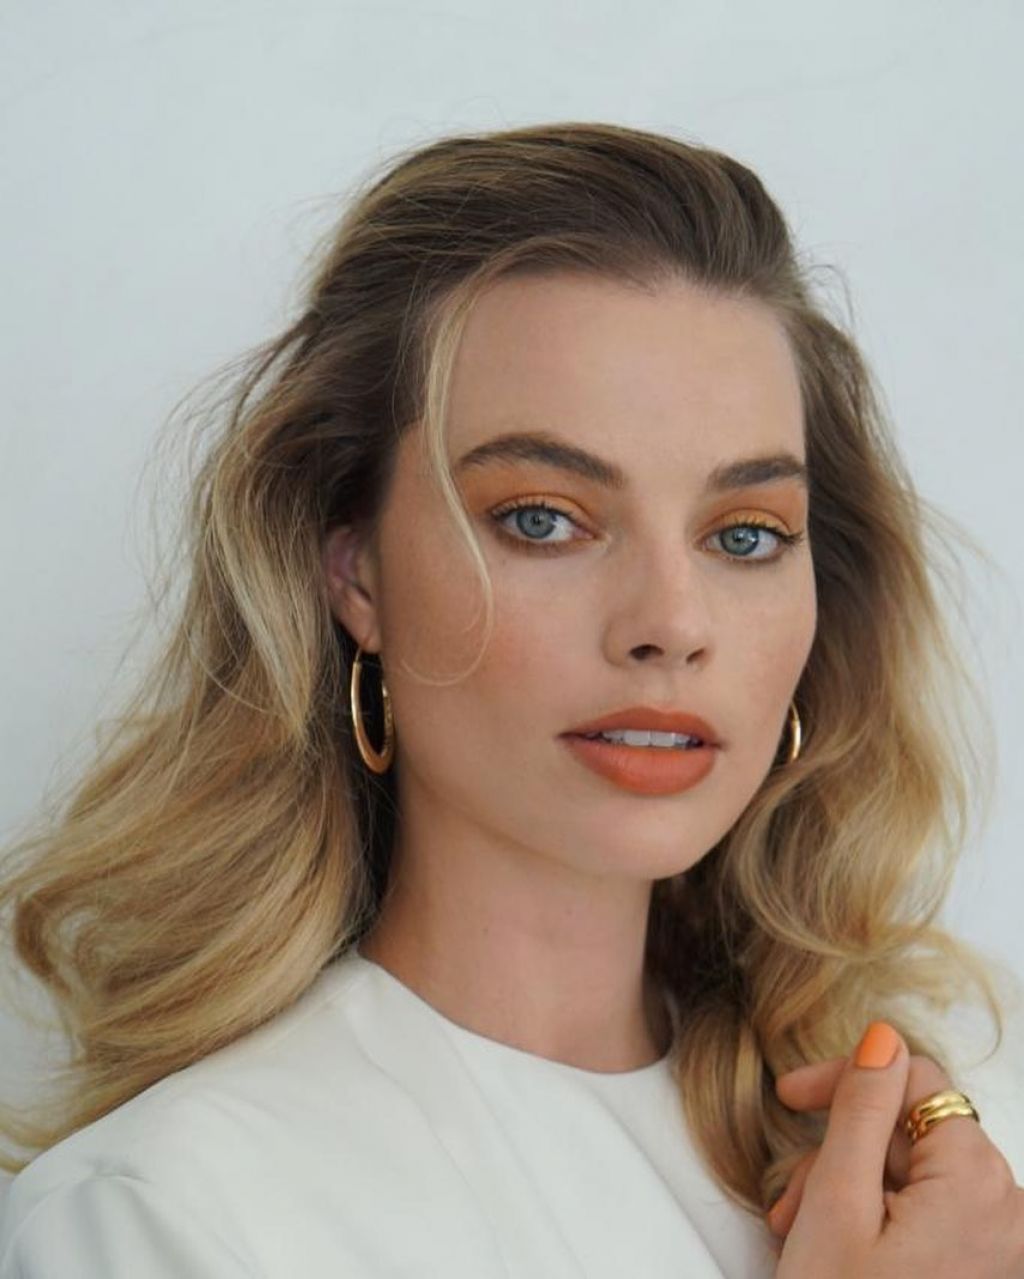 https://celebmafia.com/wp-content/uploads/2019/07/margot-robbie-once-upon-a-time-in-hollywood-press-portraits-july-2019-1.jpg